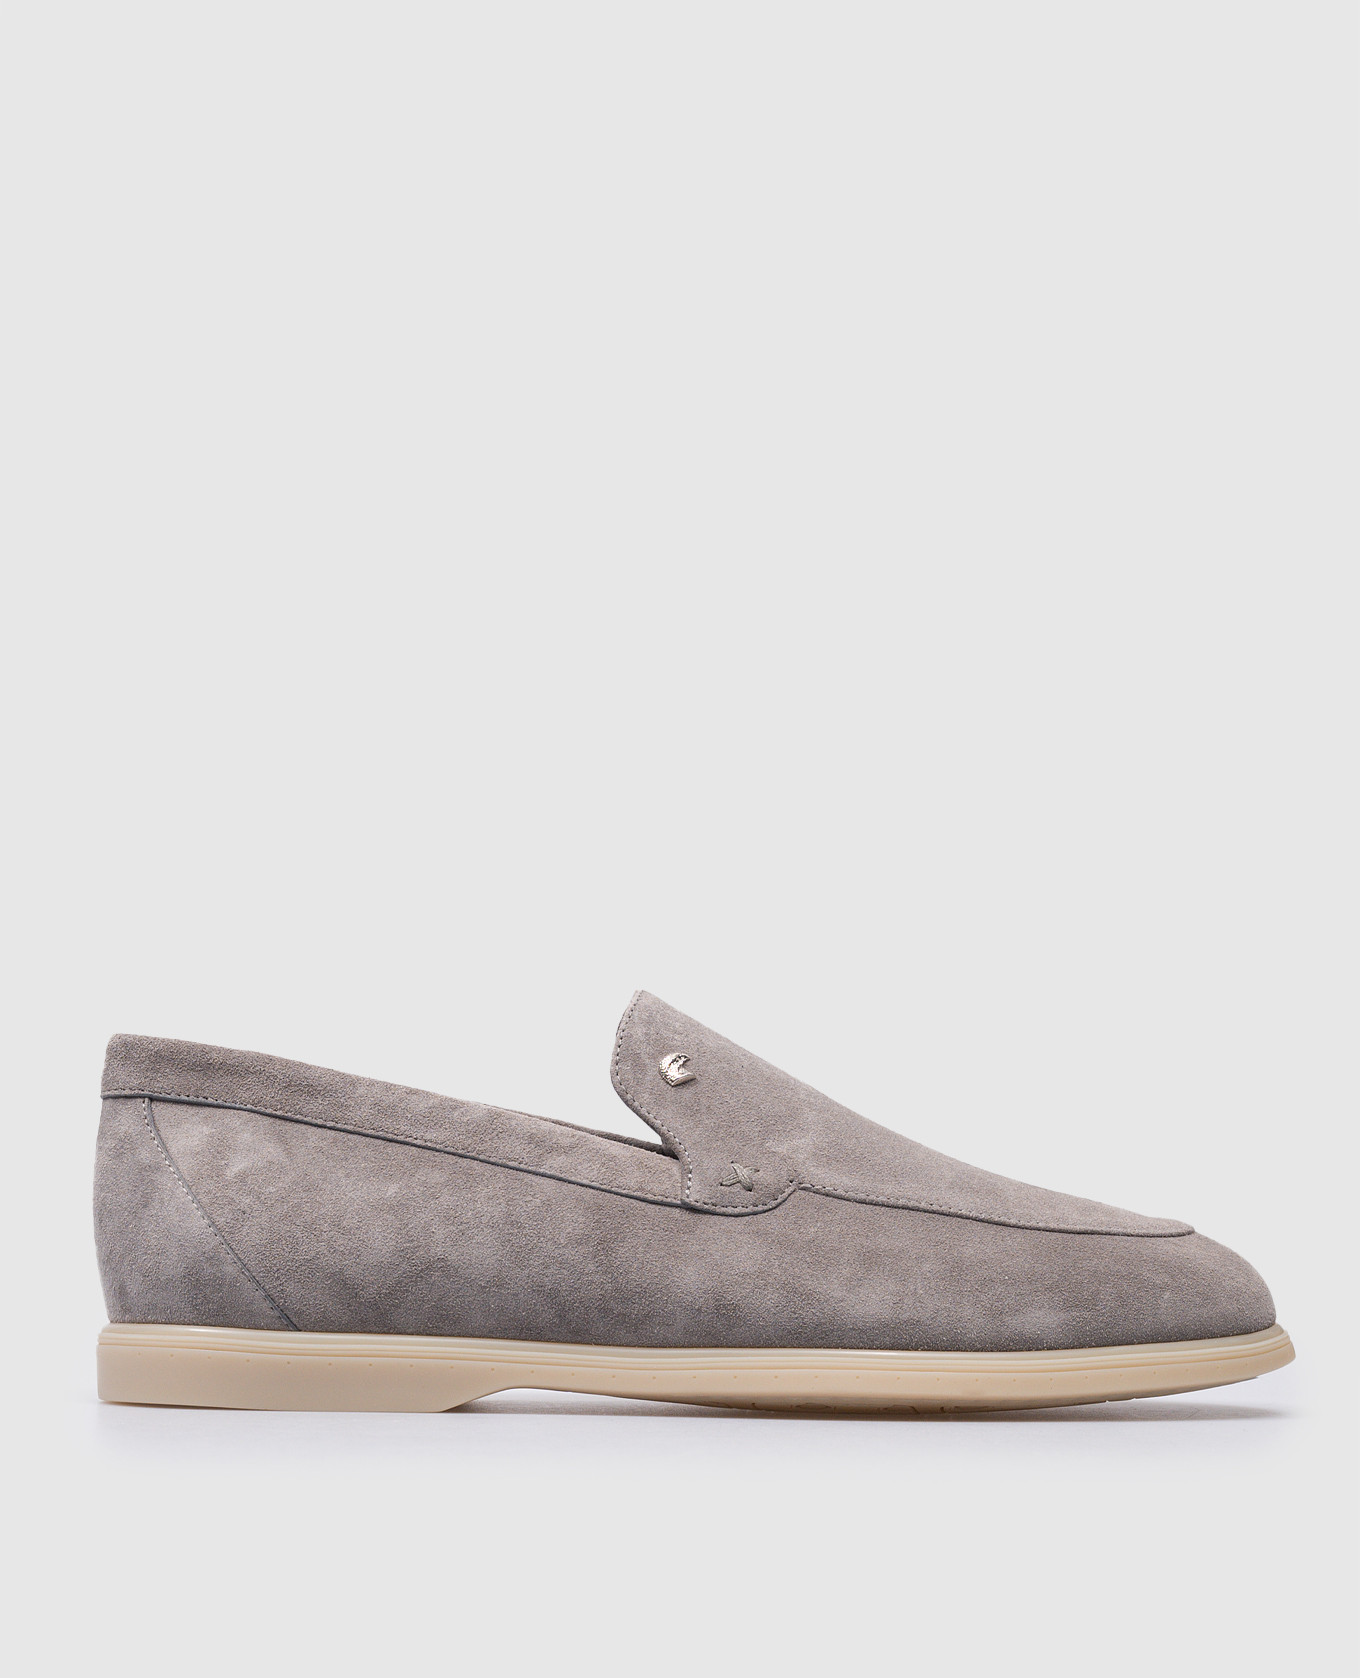 Gray suede loafers with metallic logo patch